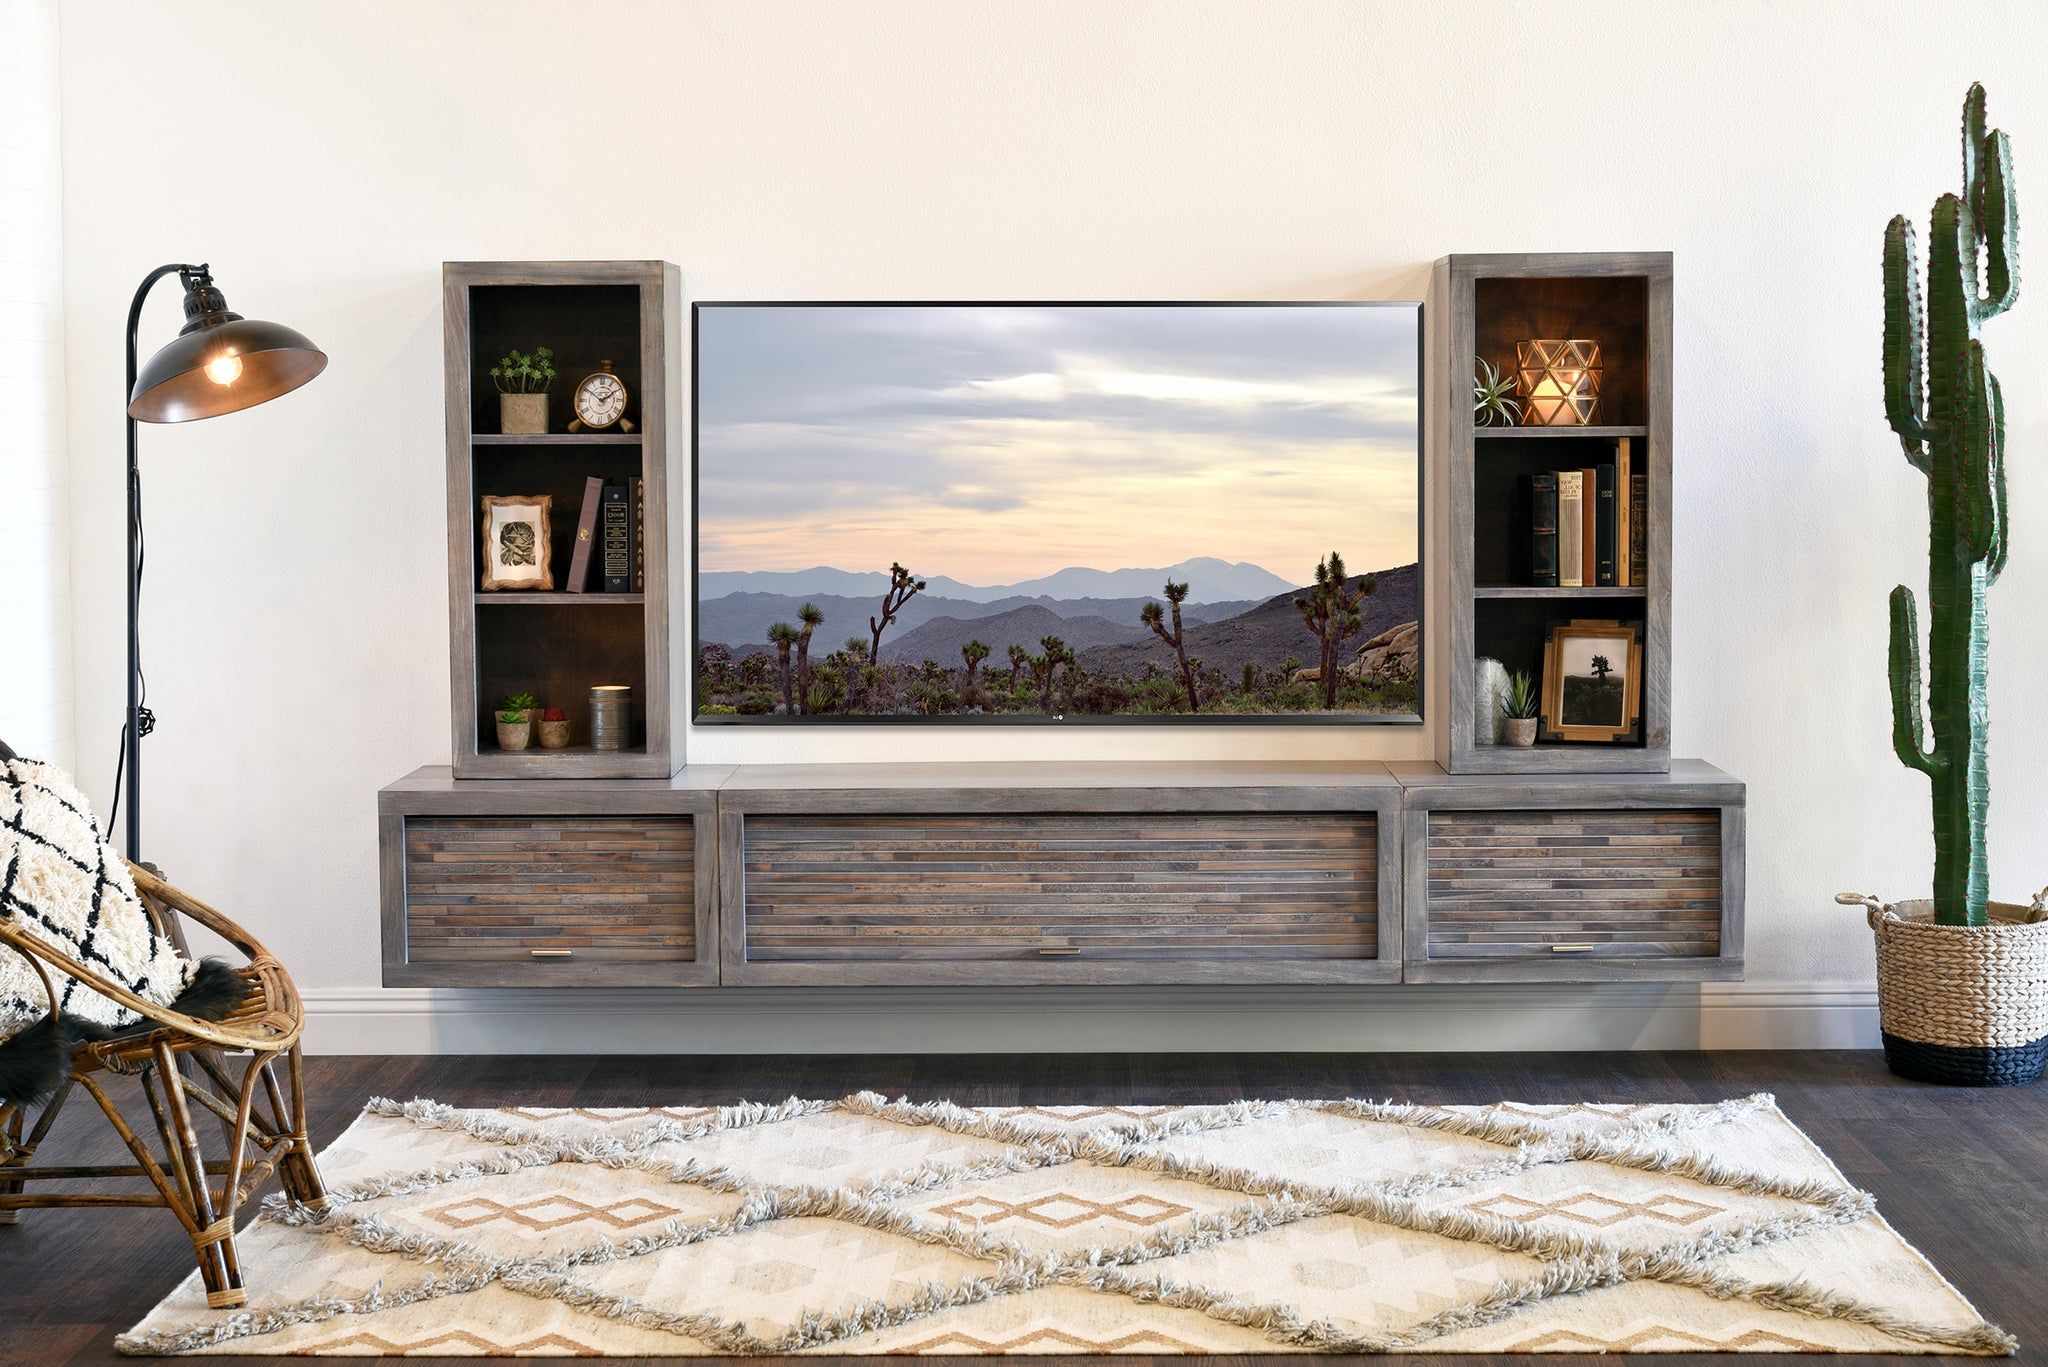 Fashionable Gray Floating Tv Stand Modern Wall Mount Entertainment Center – Eco Ge Inside Wall Mounted Floating Tv Stands (View 7 of 15)